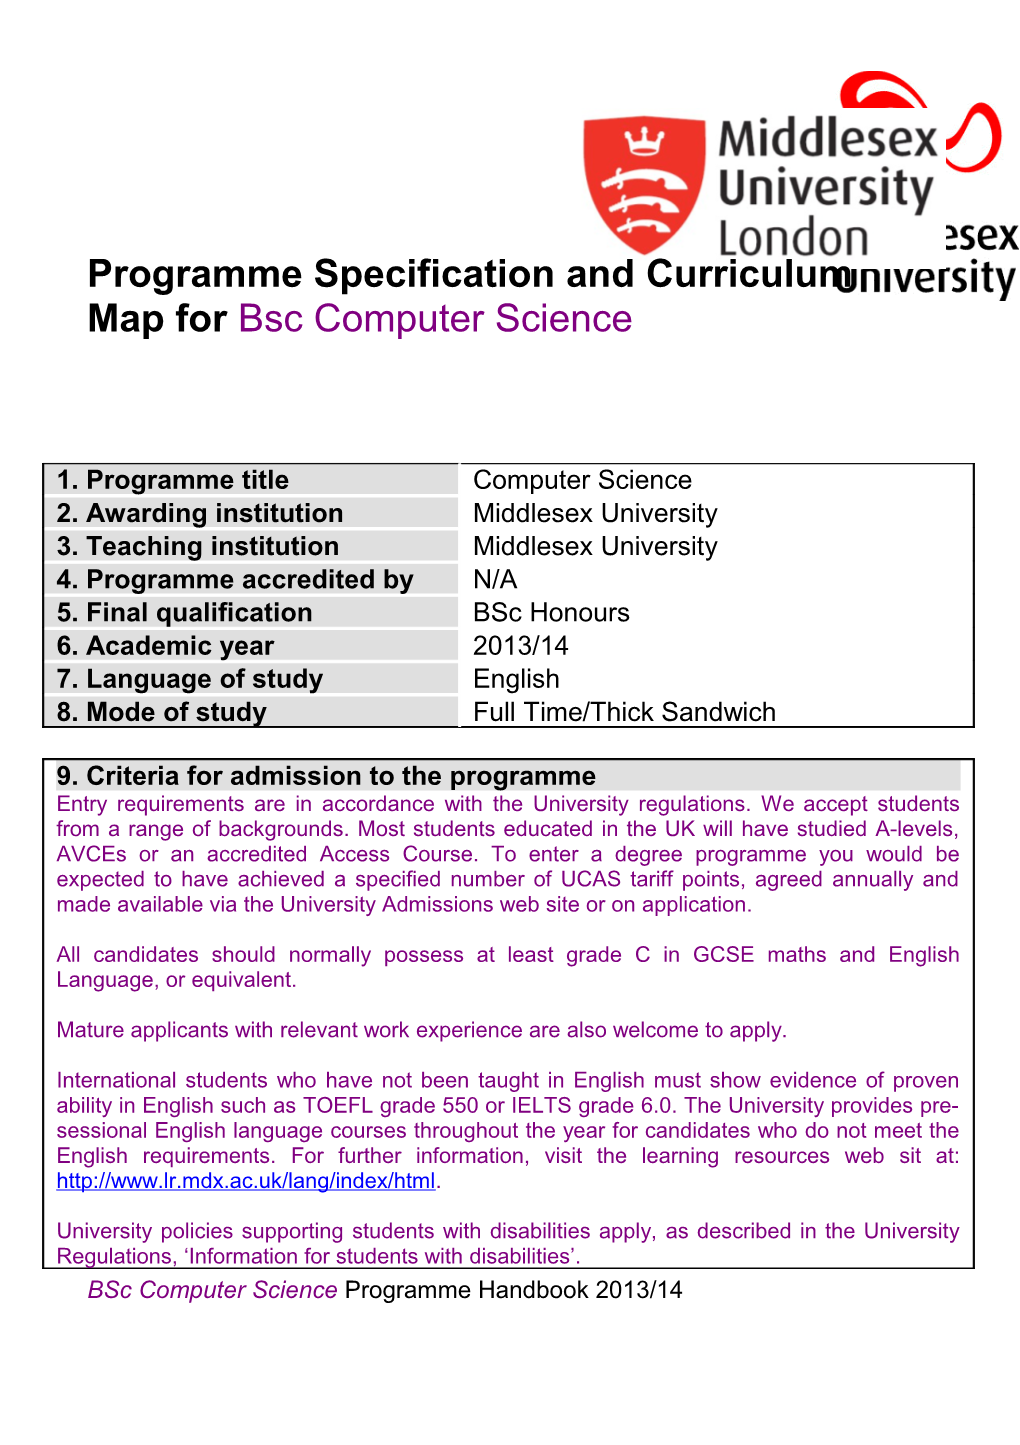 Programme Specification and Curriculum Map for Bsc Computer Science